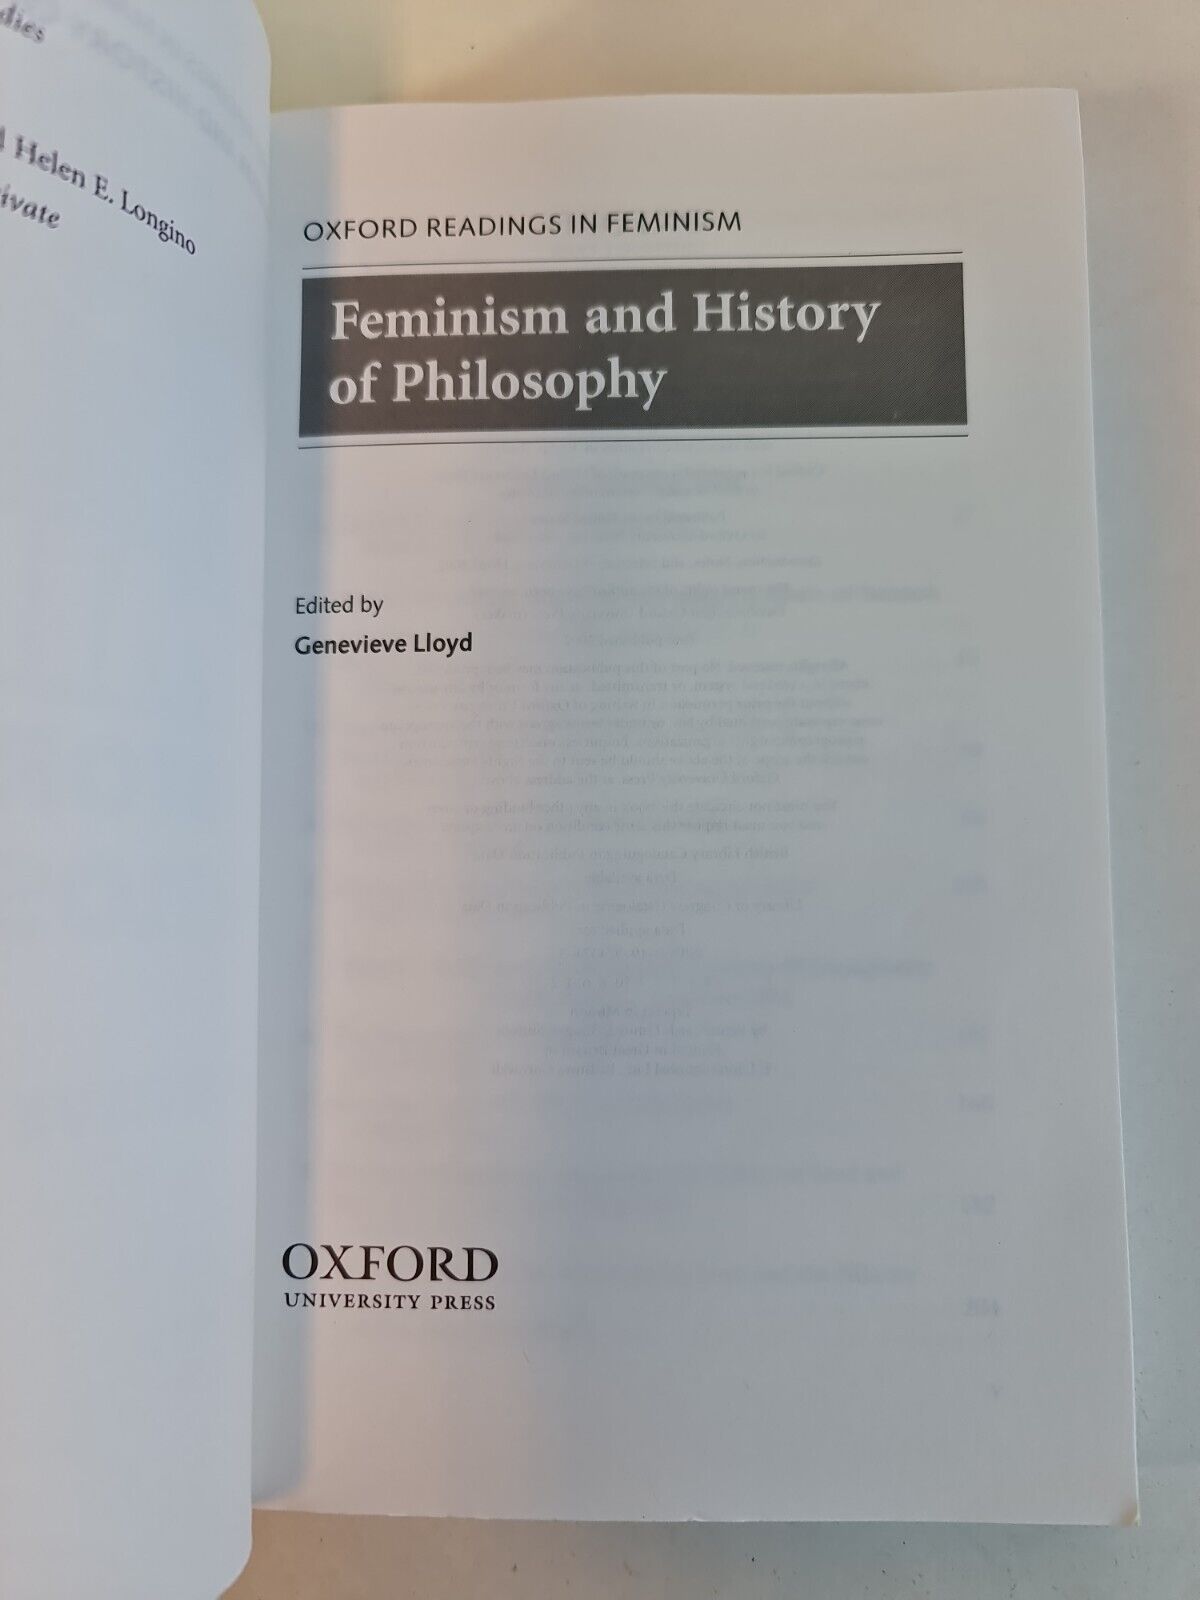 Feminism and History of Philosophy by Genevieve Lloyd (2002)